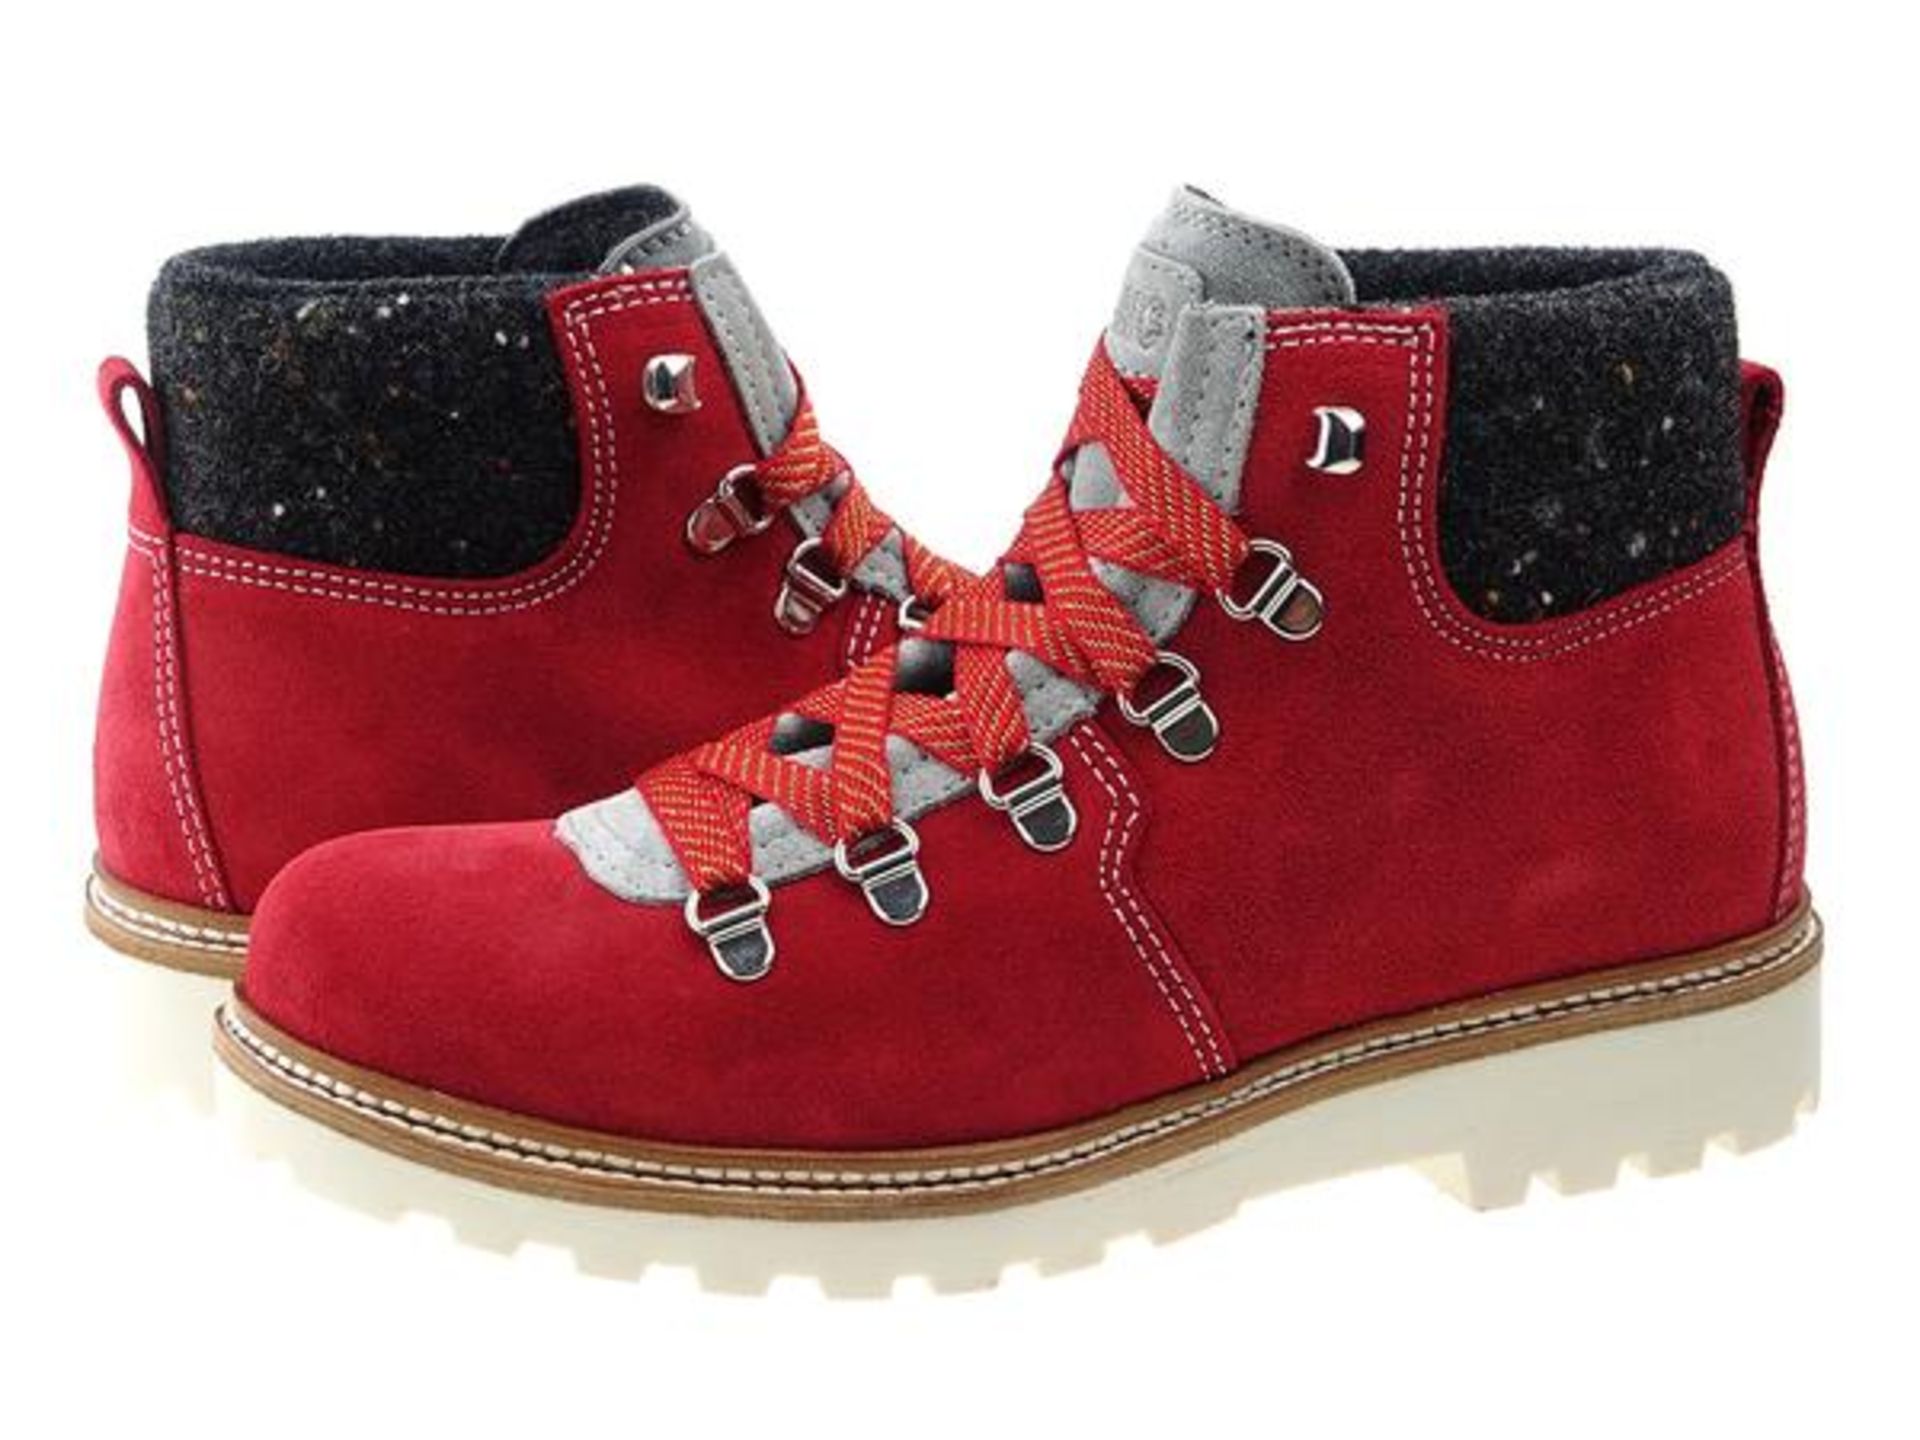 1 x Pair of Designer Olang Merano BTX 815 Rosso Women's Winter Boots - Euro Size 38 - Brand New - Image 3 of 4